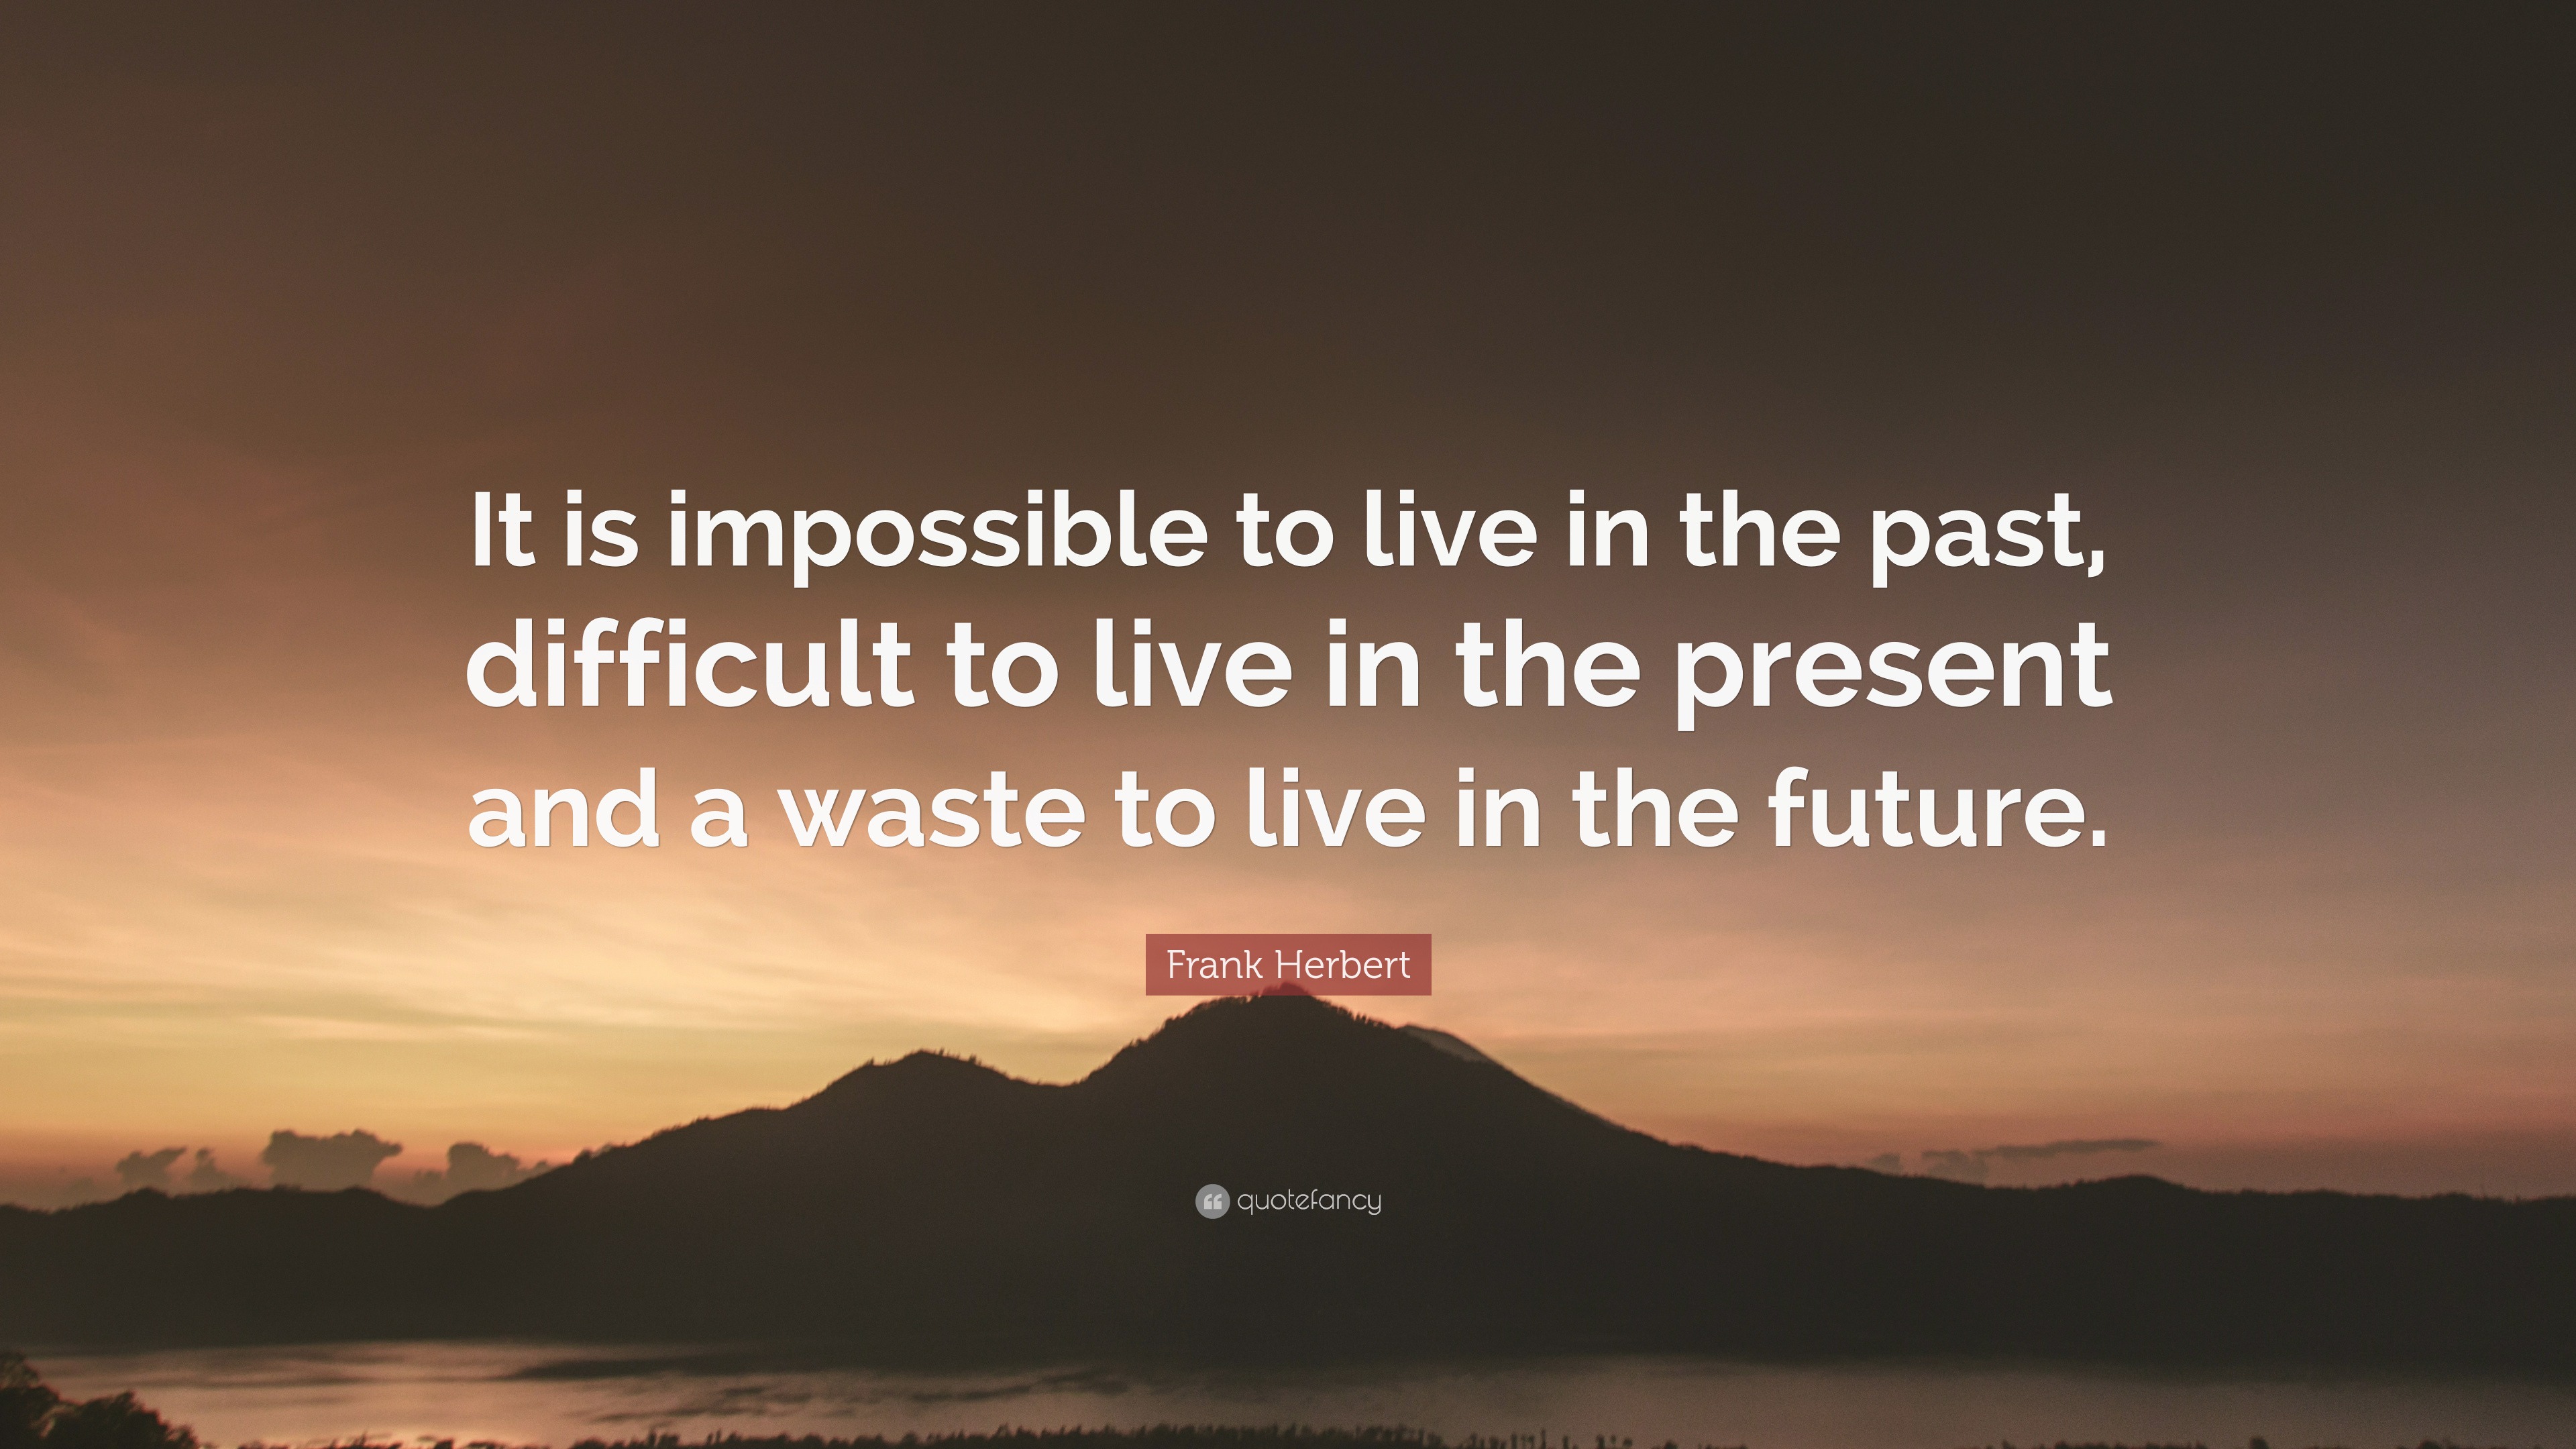 Frank Herbert Quote: “It is impossible to live in the past, difficult ...